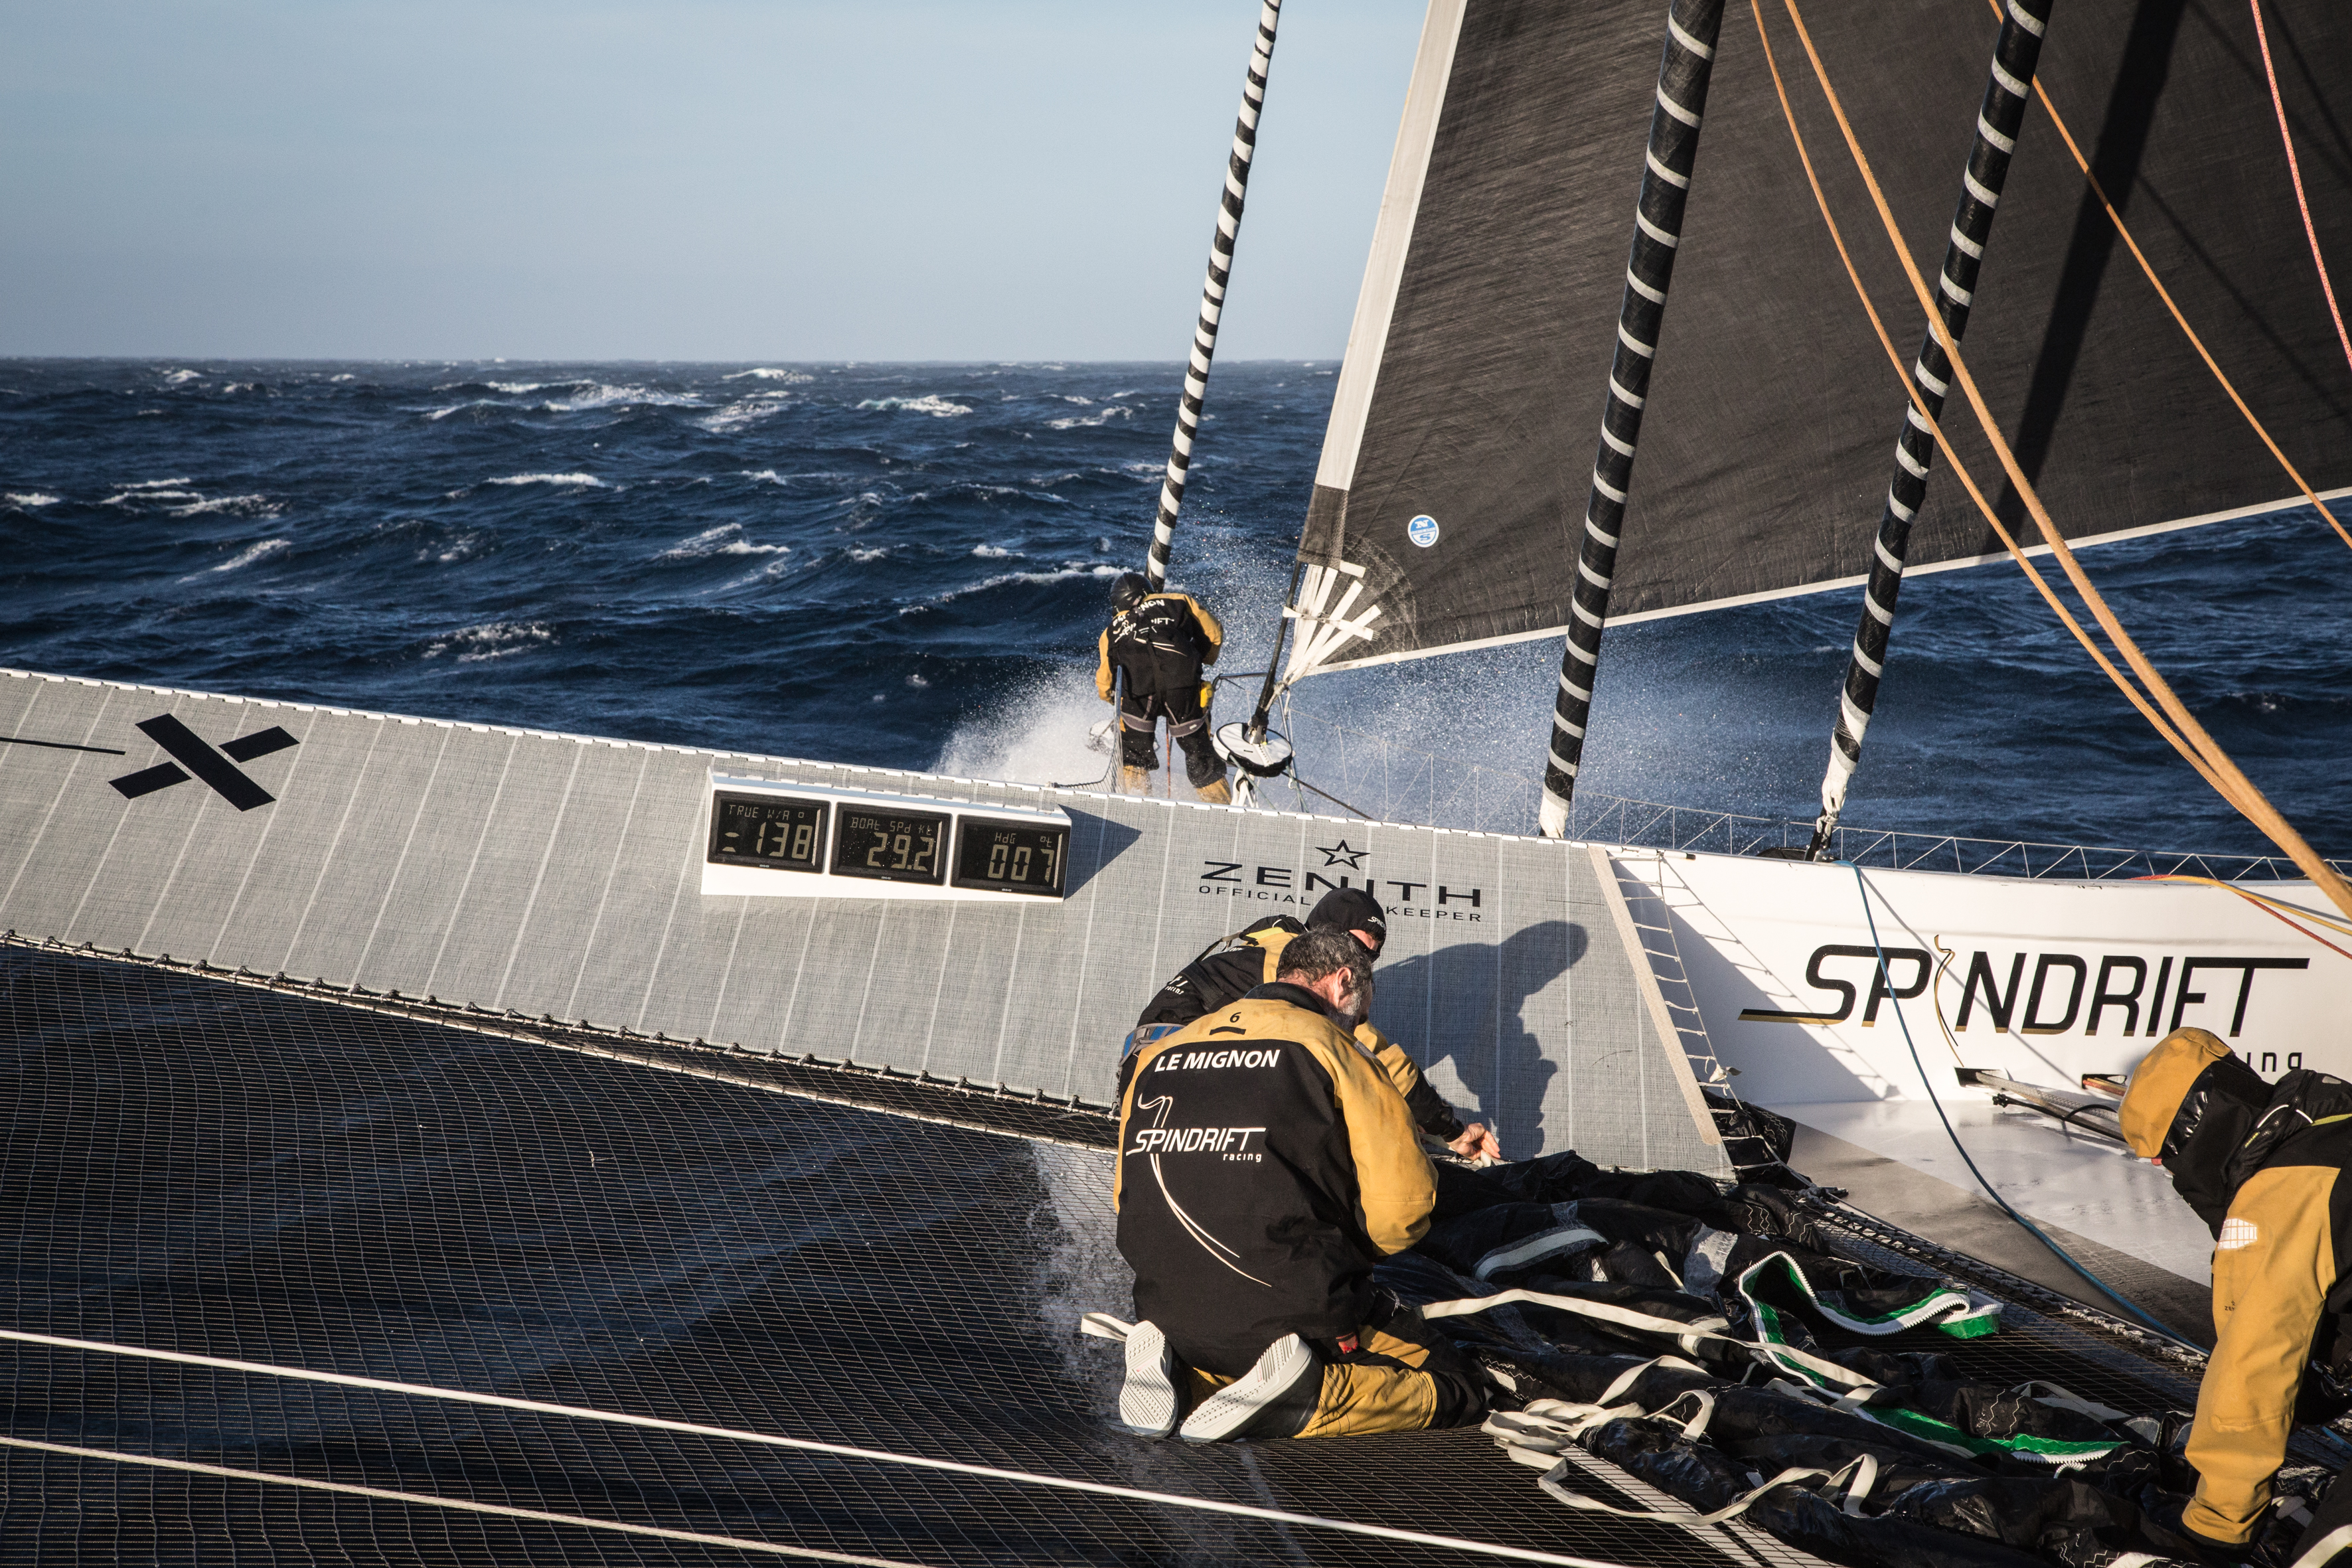  Trophee Jules Verne  Day 47  Final Day